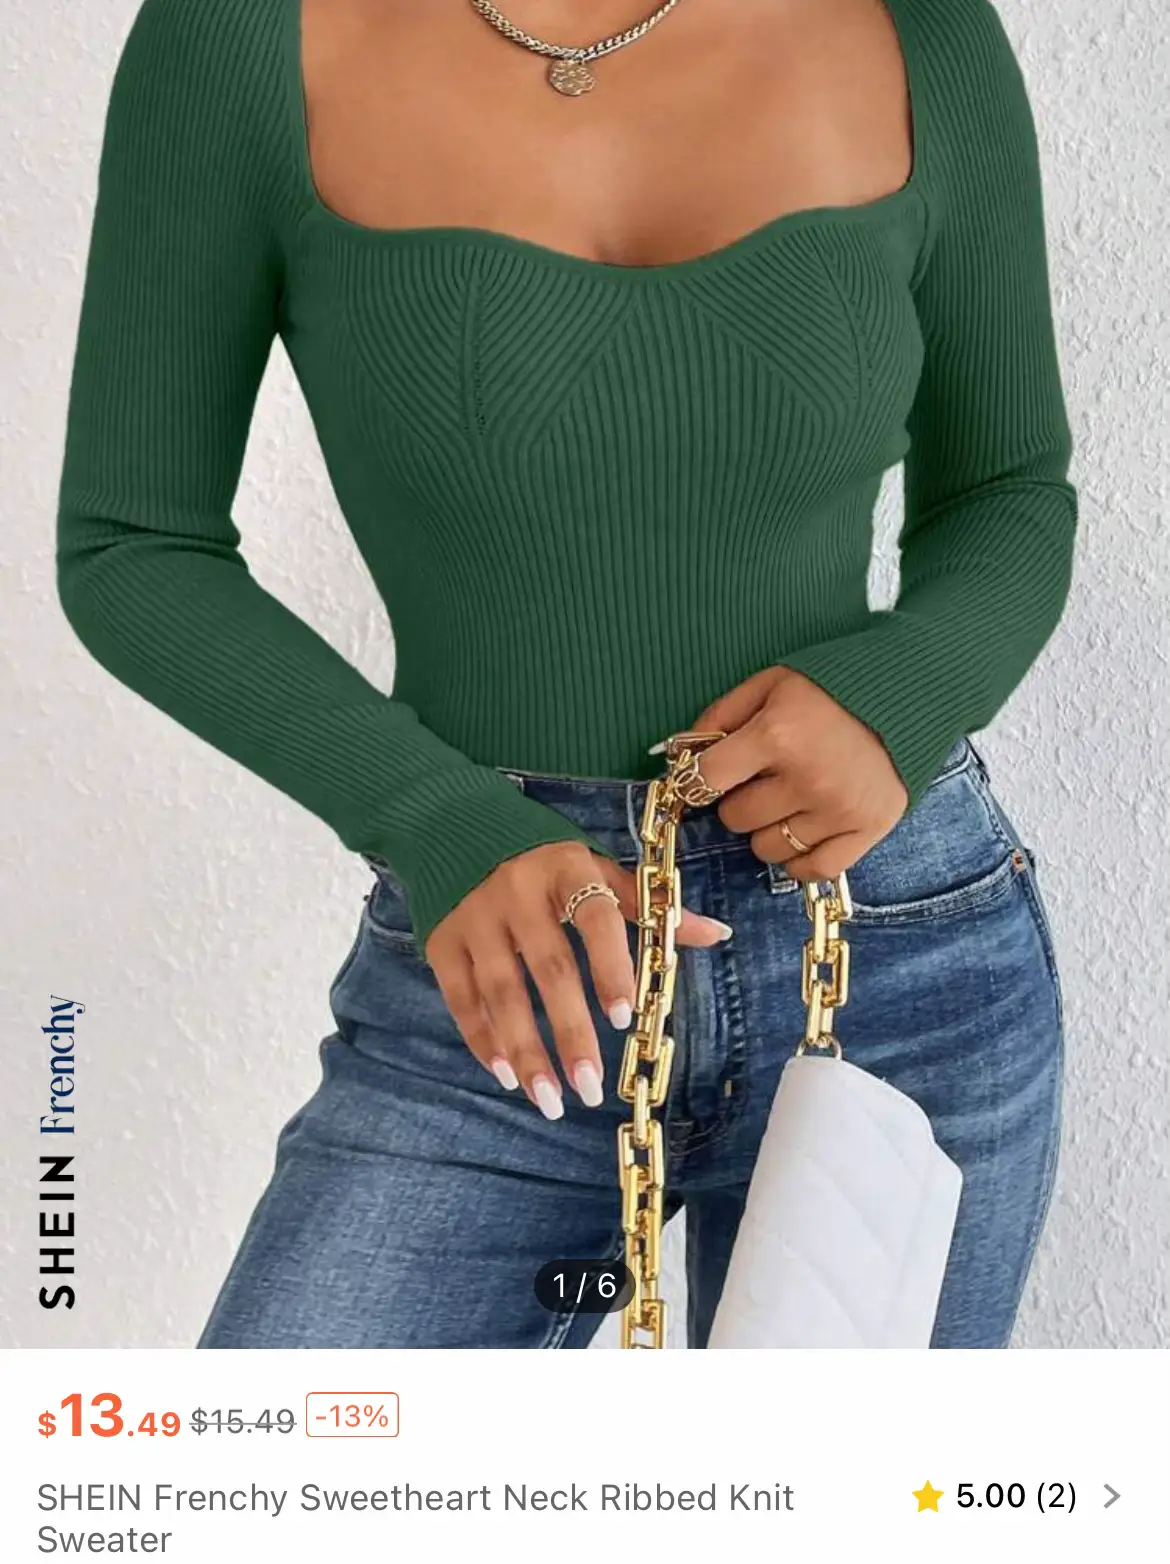 SHEIN Frenchy Sweetheart Neck Ribbed Knit Sweater